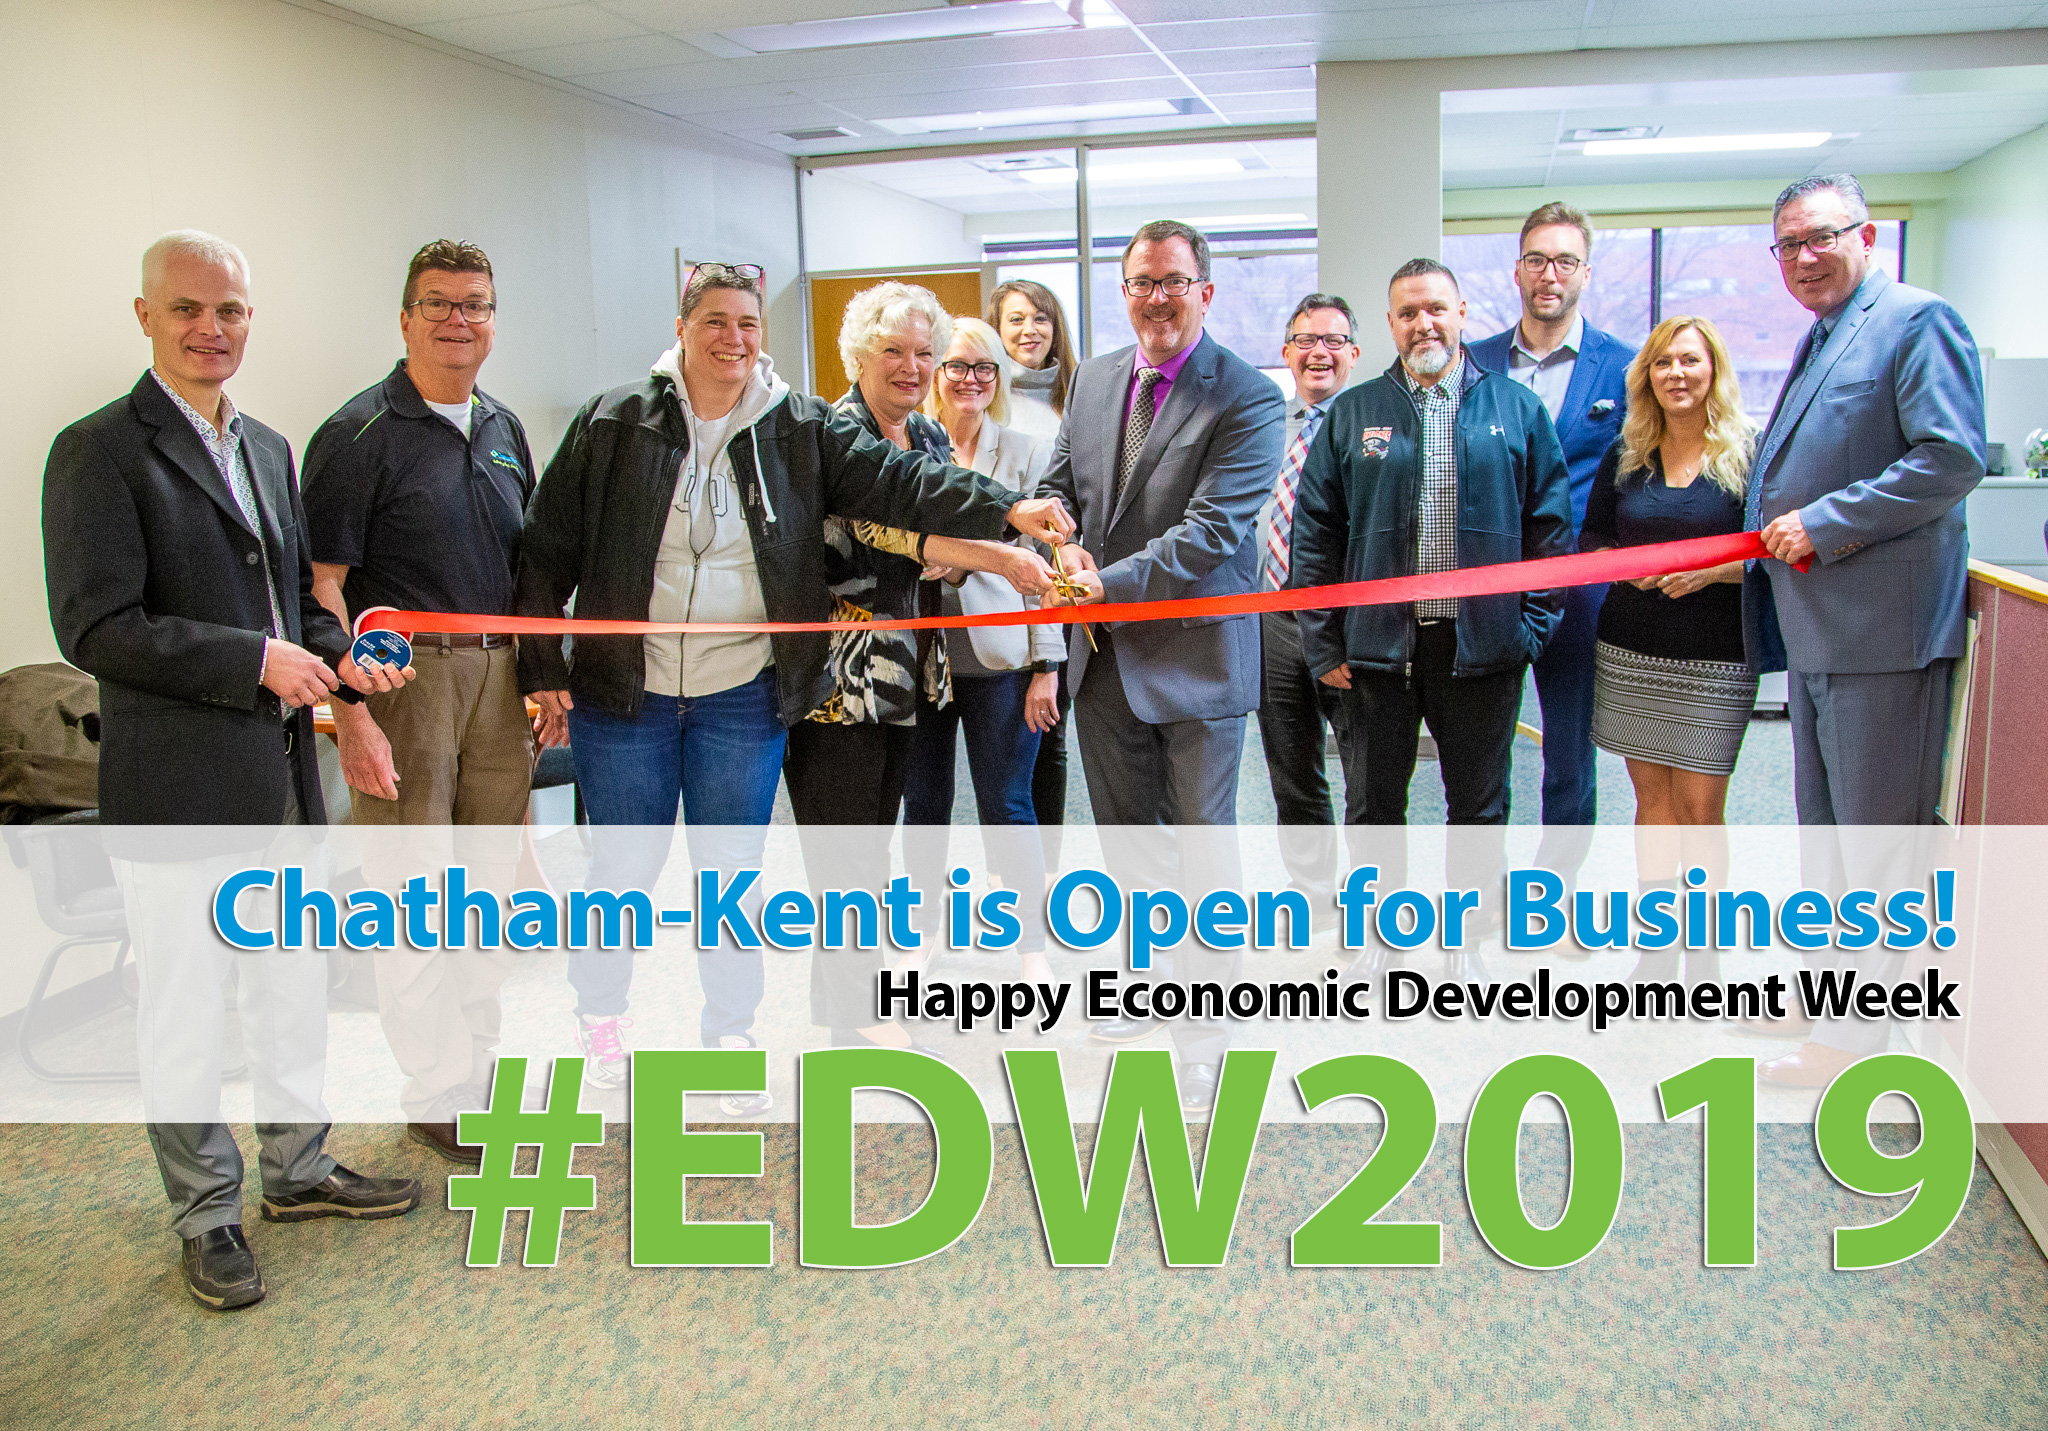 The Chatham-Kent Municipal team cutting the ribbon in honor of Economic Development Week.